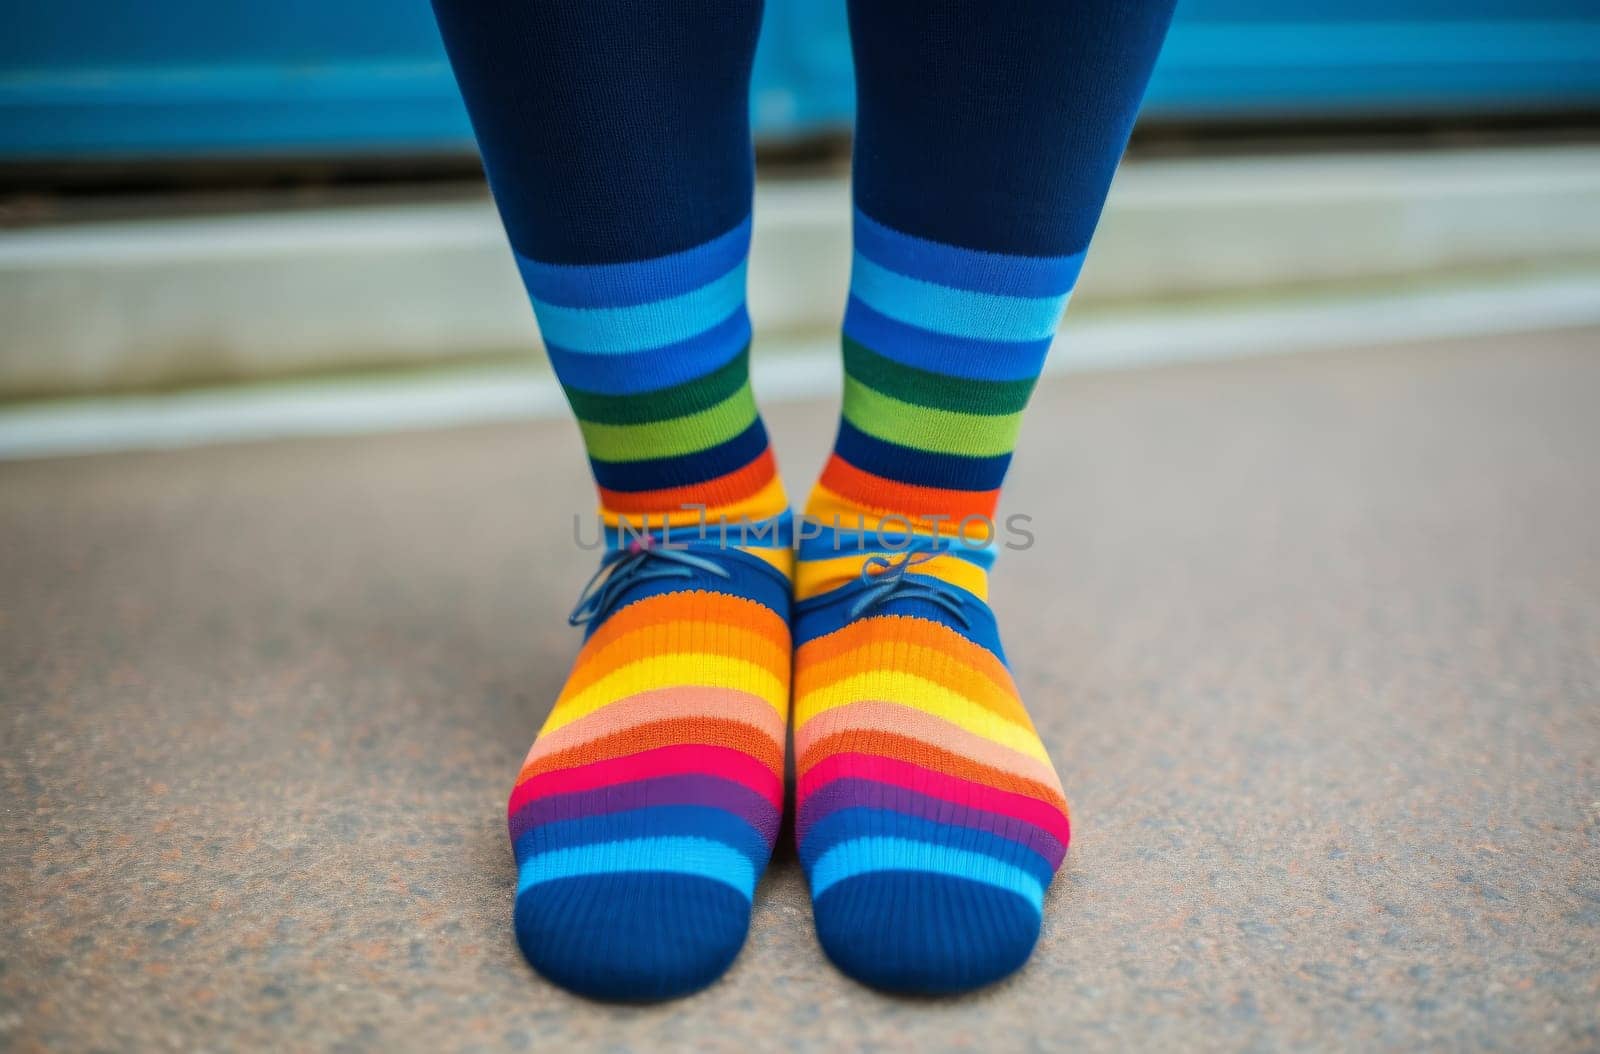 Person Wearing Colorful Socks by gcm